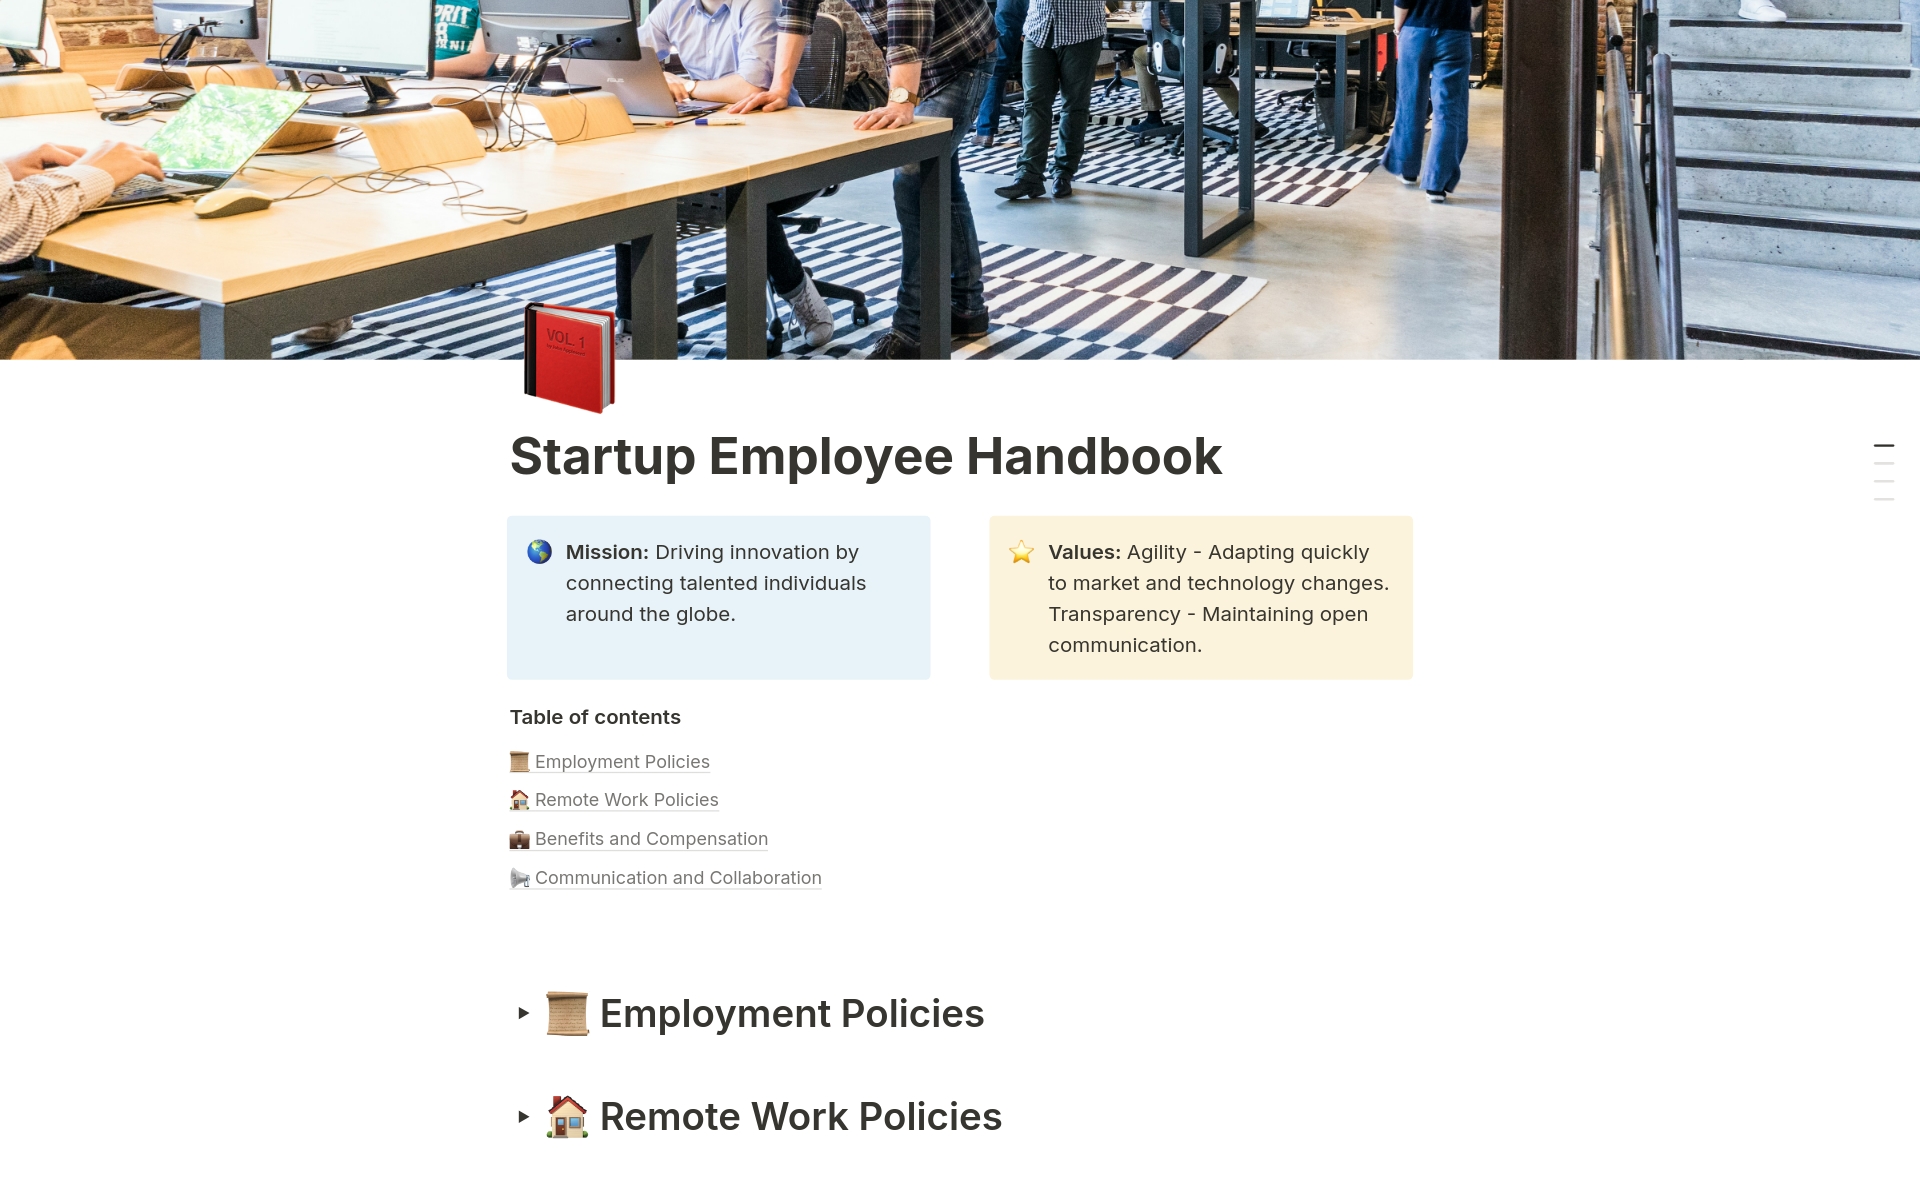 Essential guide for startup employees, outlining innovative policies, agile procedures, and dynamic company culture.